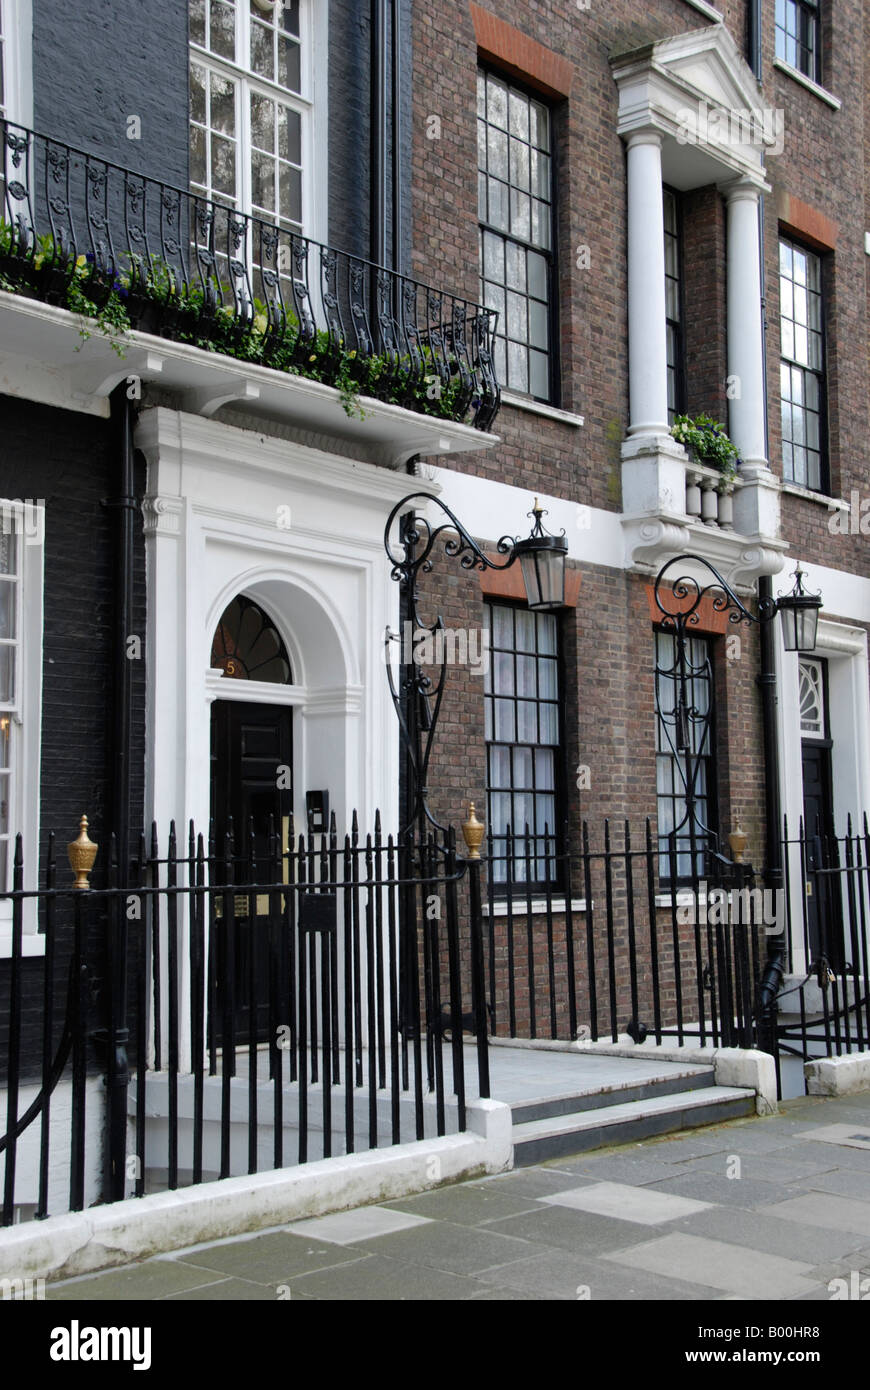 Period buildings in Manchester Square London Stock Photo